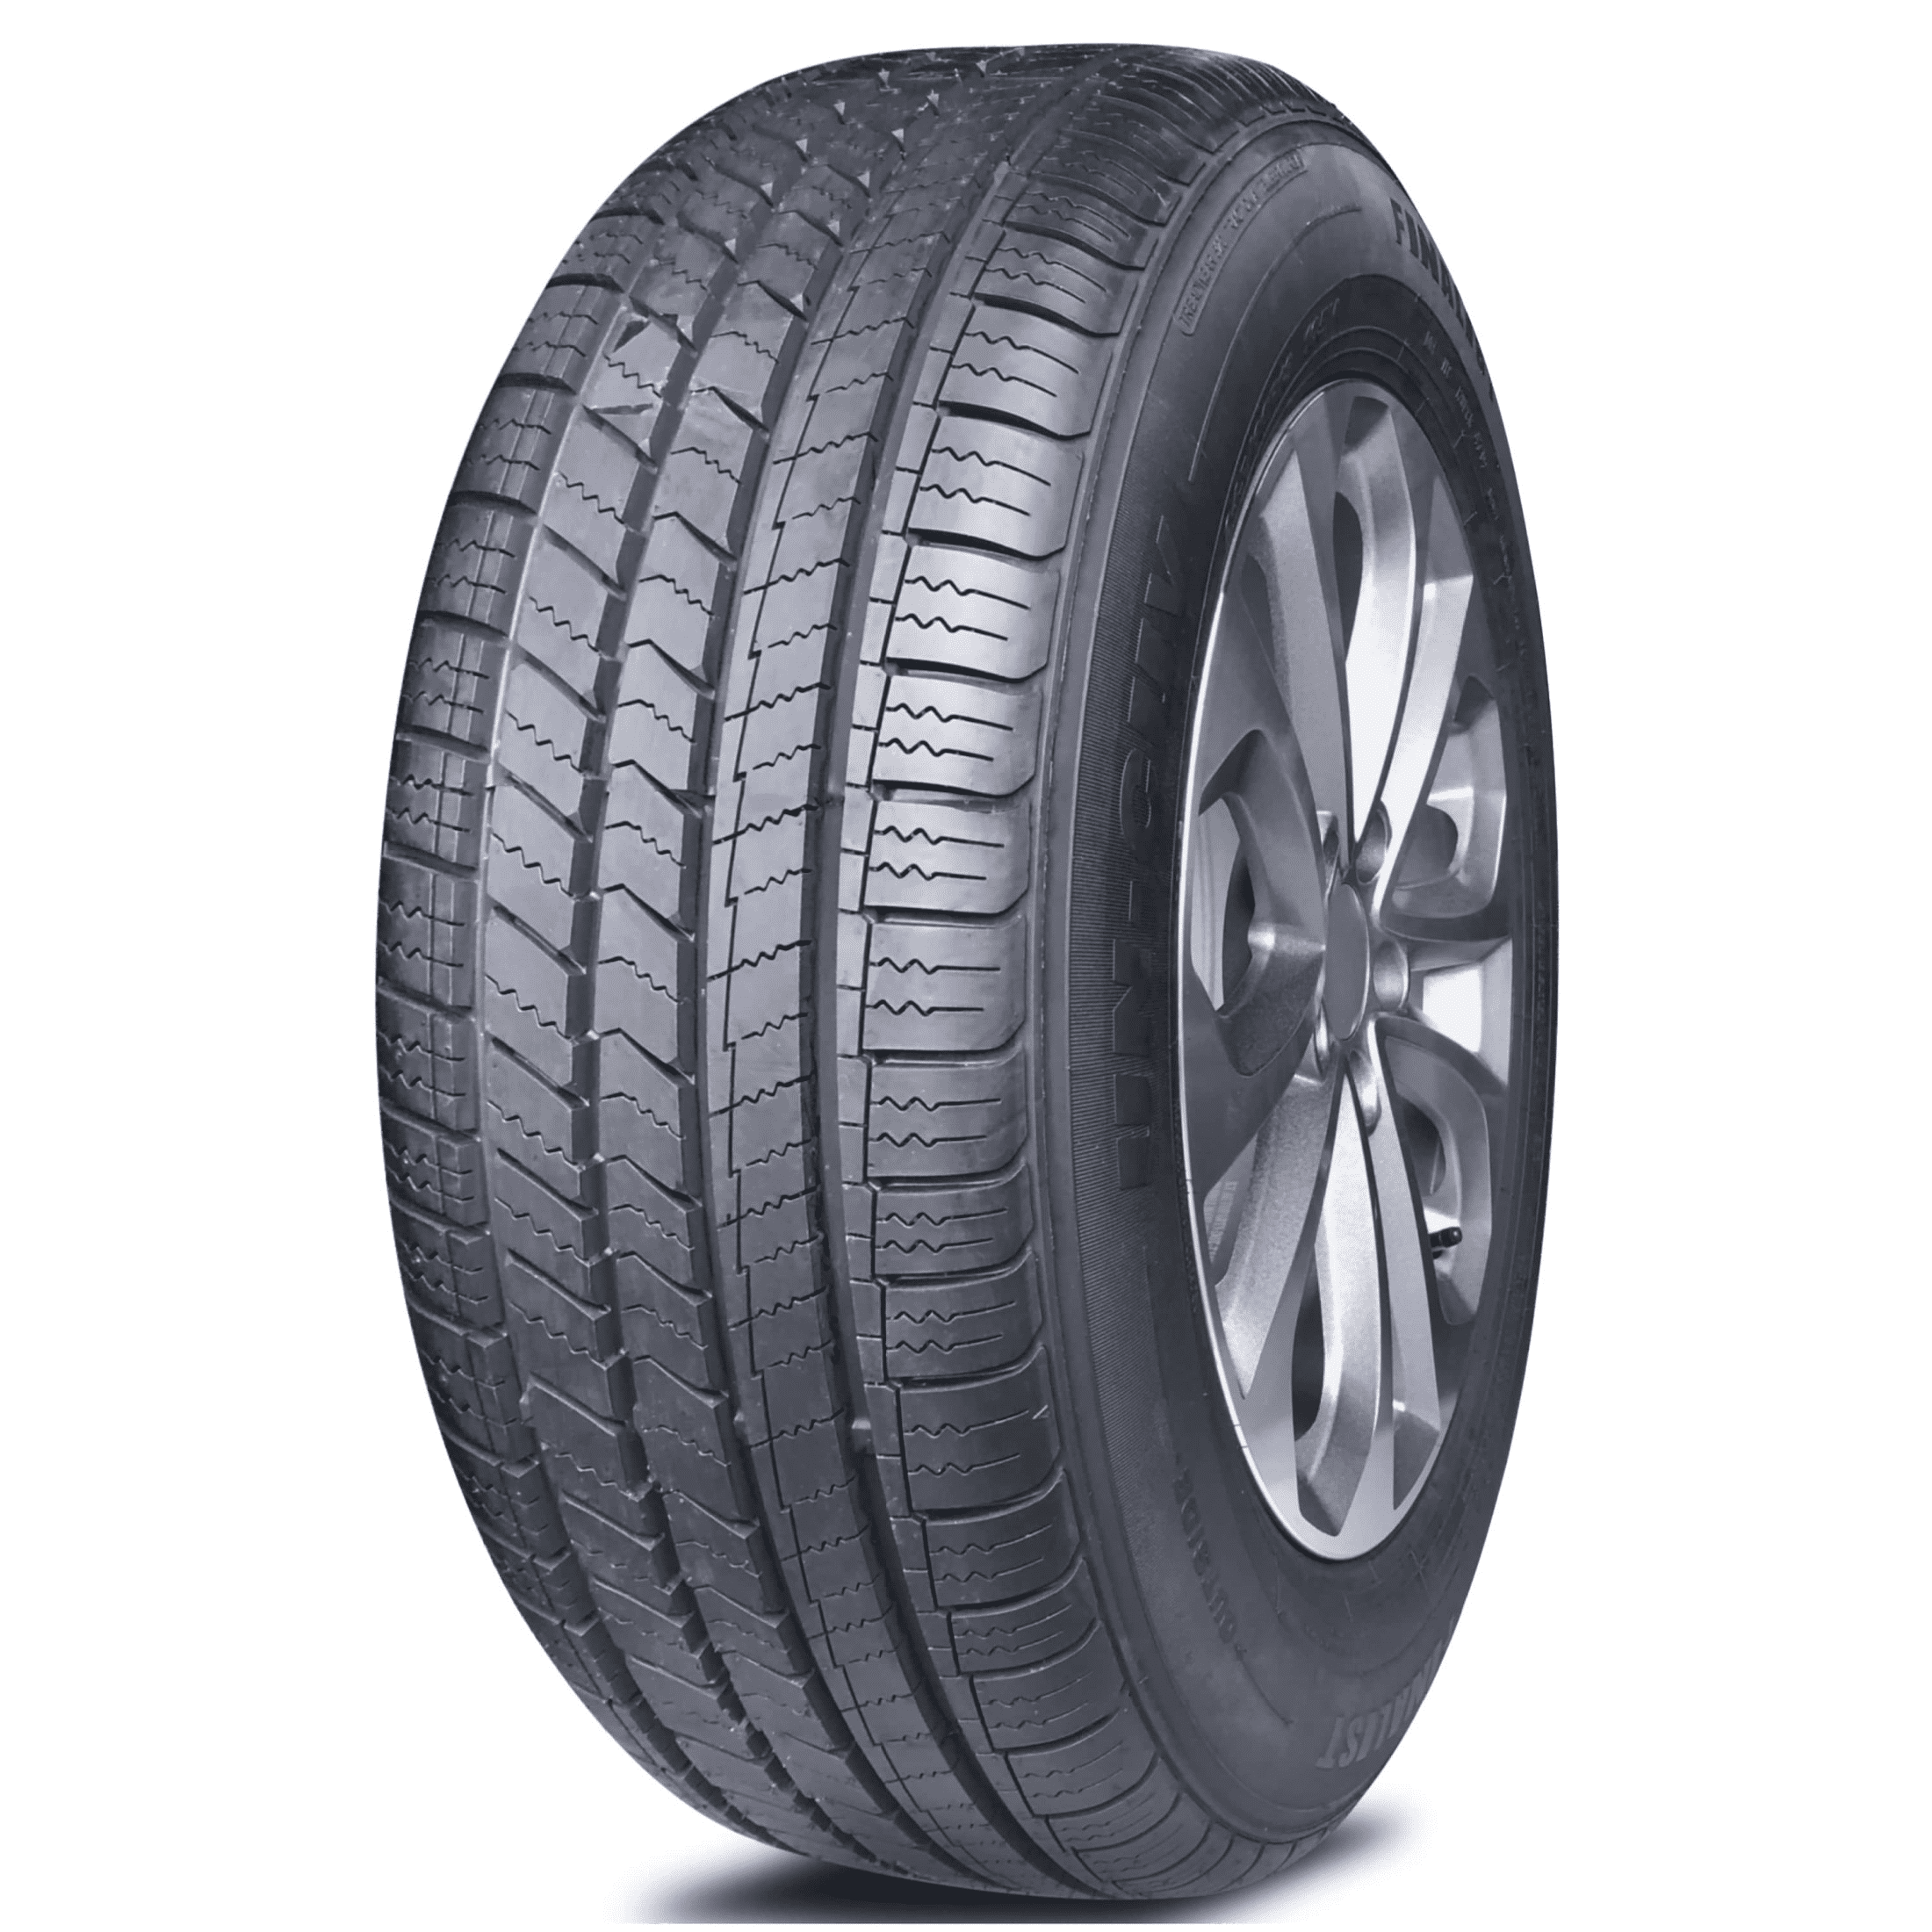 High 235/65R17 UN-CUV A/S All SUV 235/65/17 CUV 108V Load Season Performance Finalist XL Only) (Tire Extra Tire